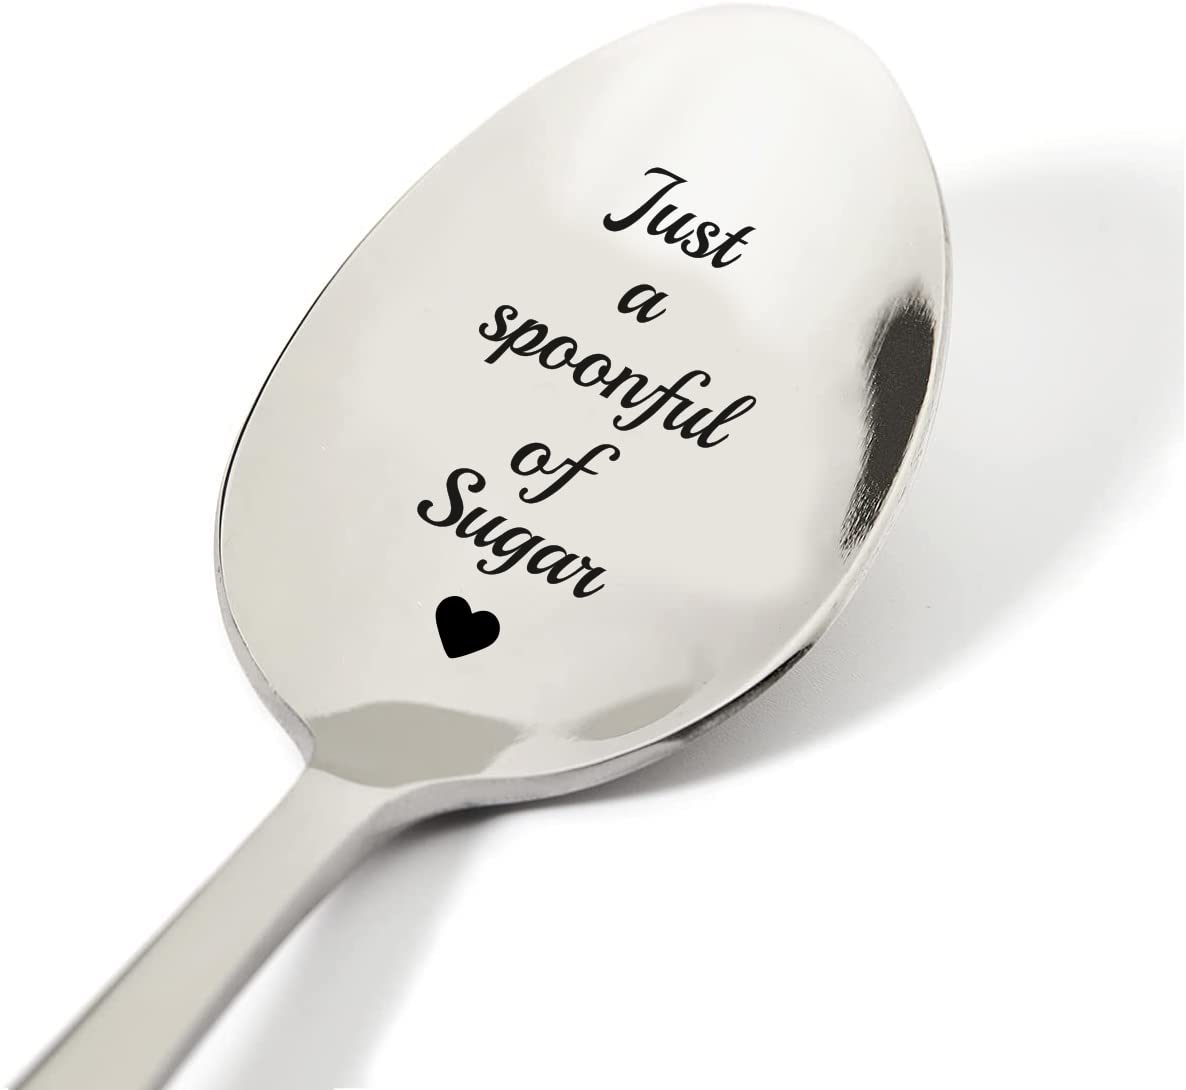 TyM Just a spoonful of sugar Engraved Stainless Steel spoon for coffee tea cereal ice cream - Engraved gift for him/her - 7 inch Sturdy handle and food safe engraving